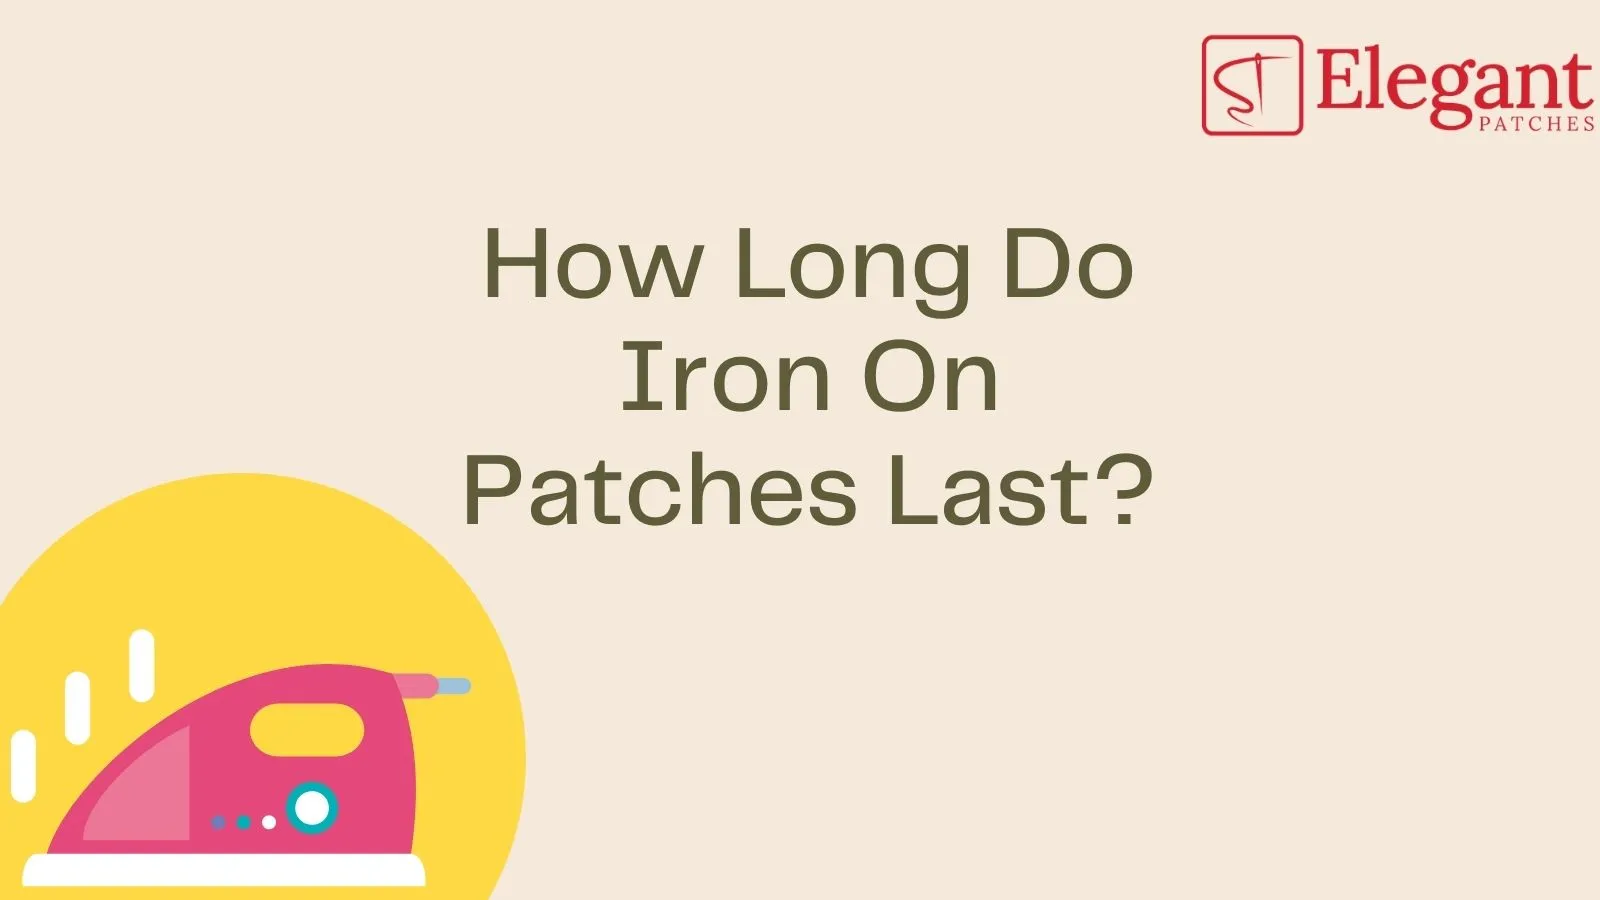 Image For How Long Do Iron On Patches Last?